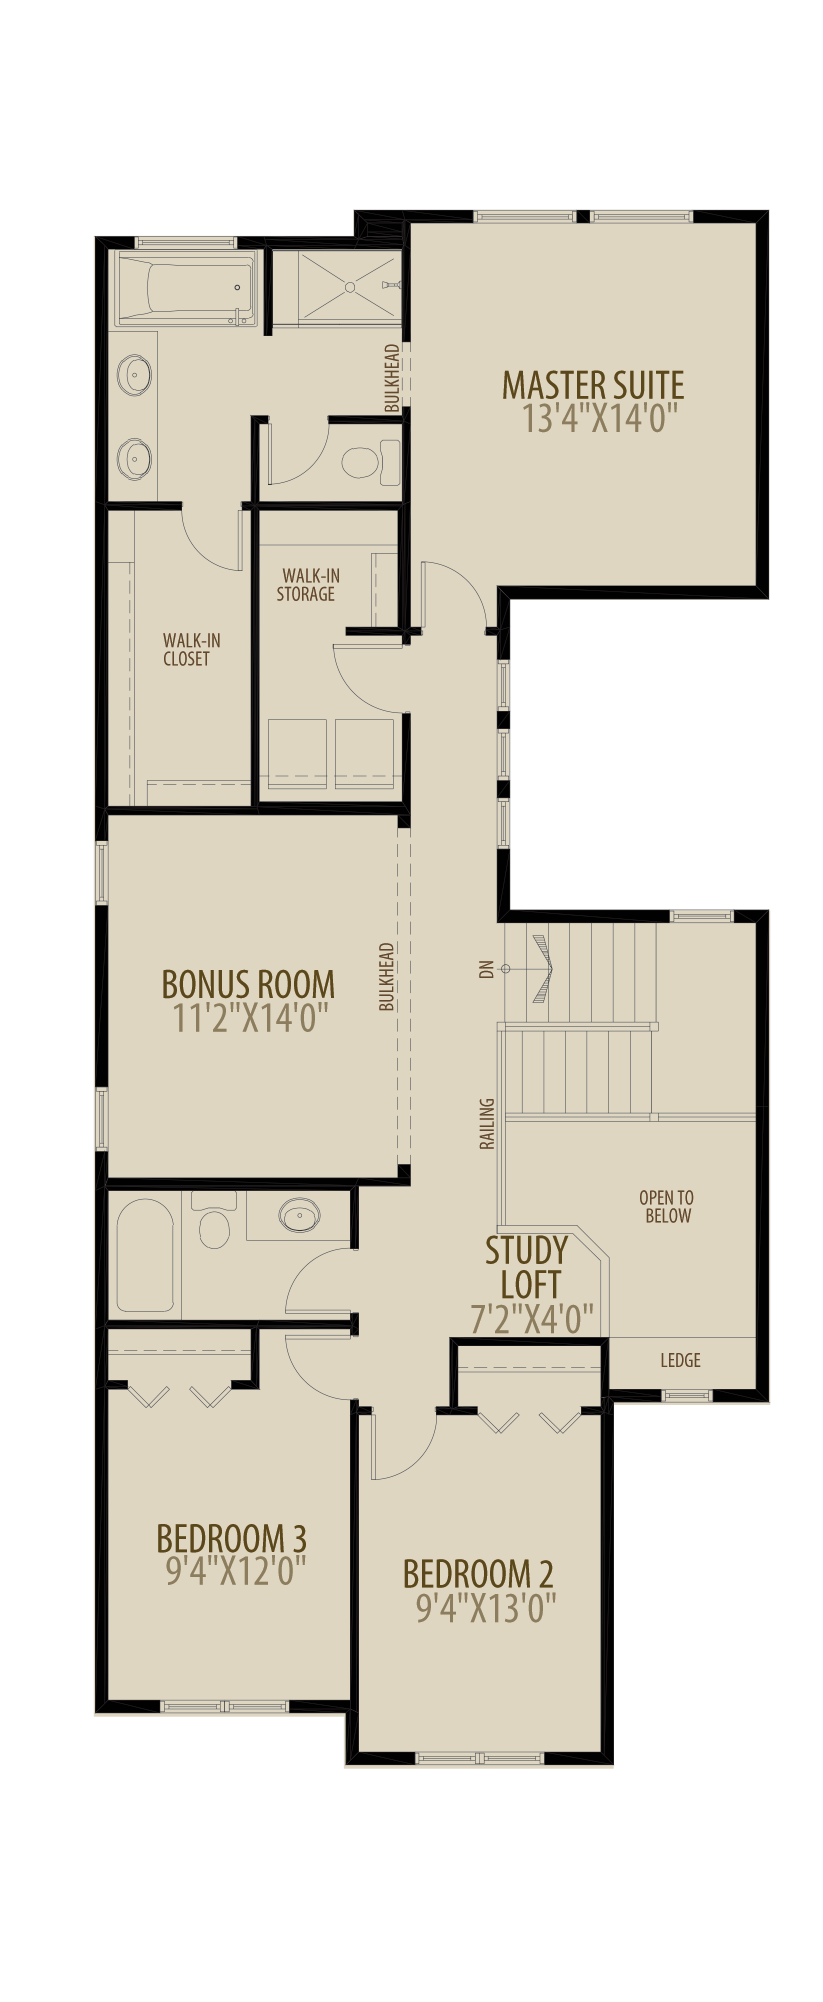 Extended Bedrooms adds 20 sq ft